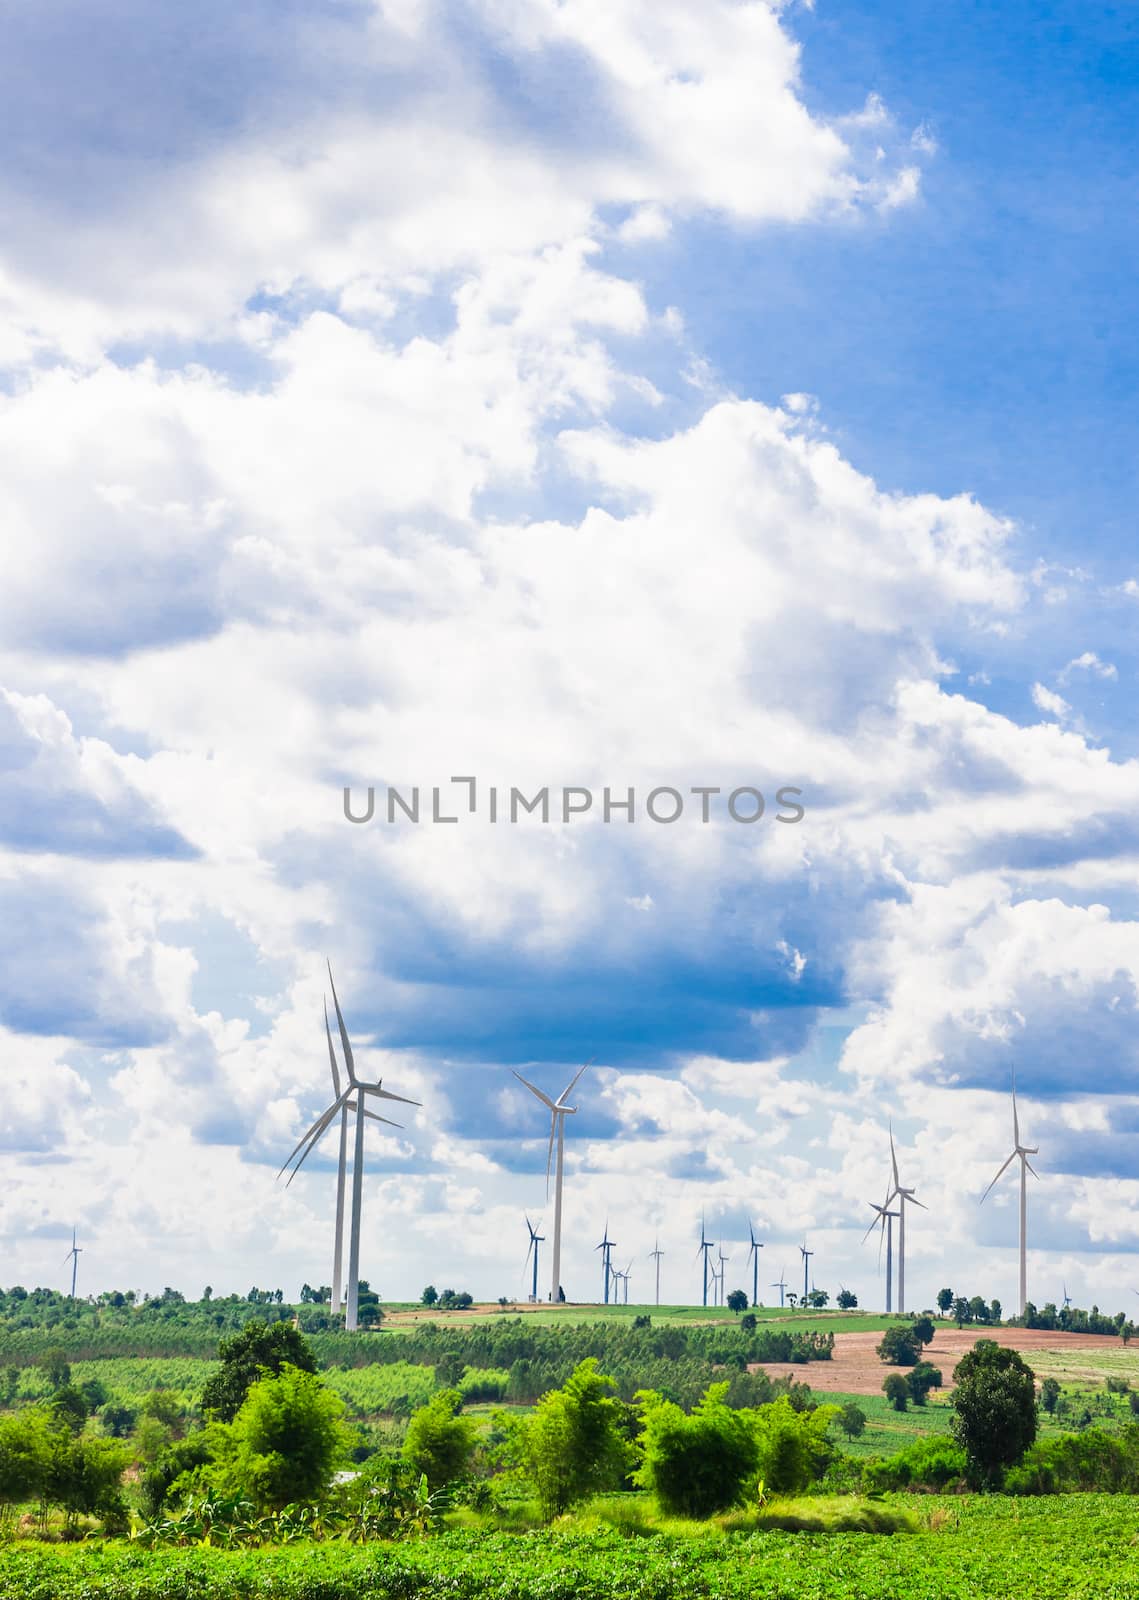 windmills for electric power production